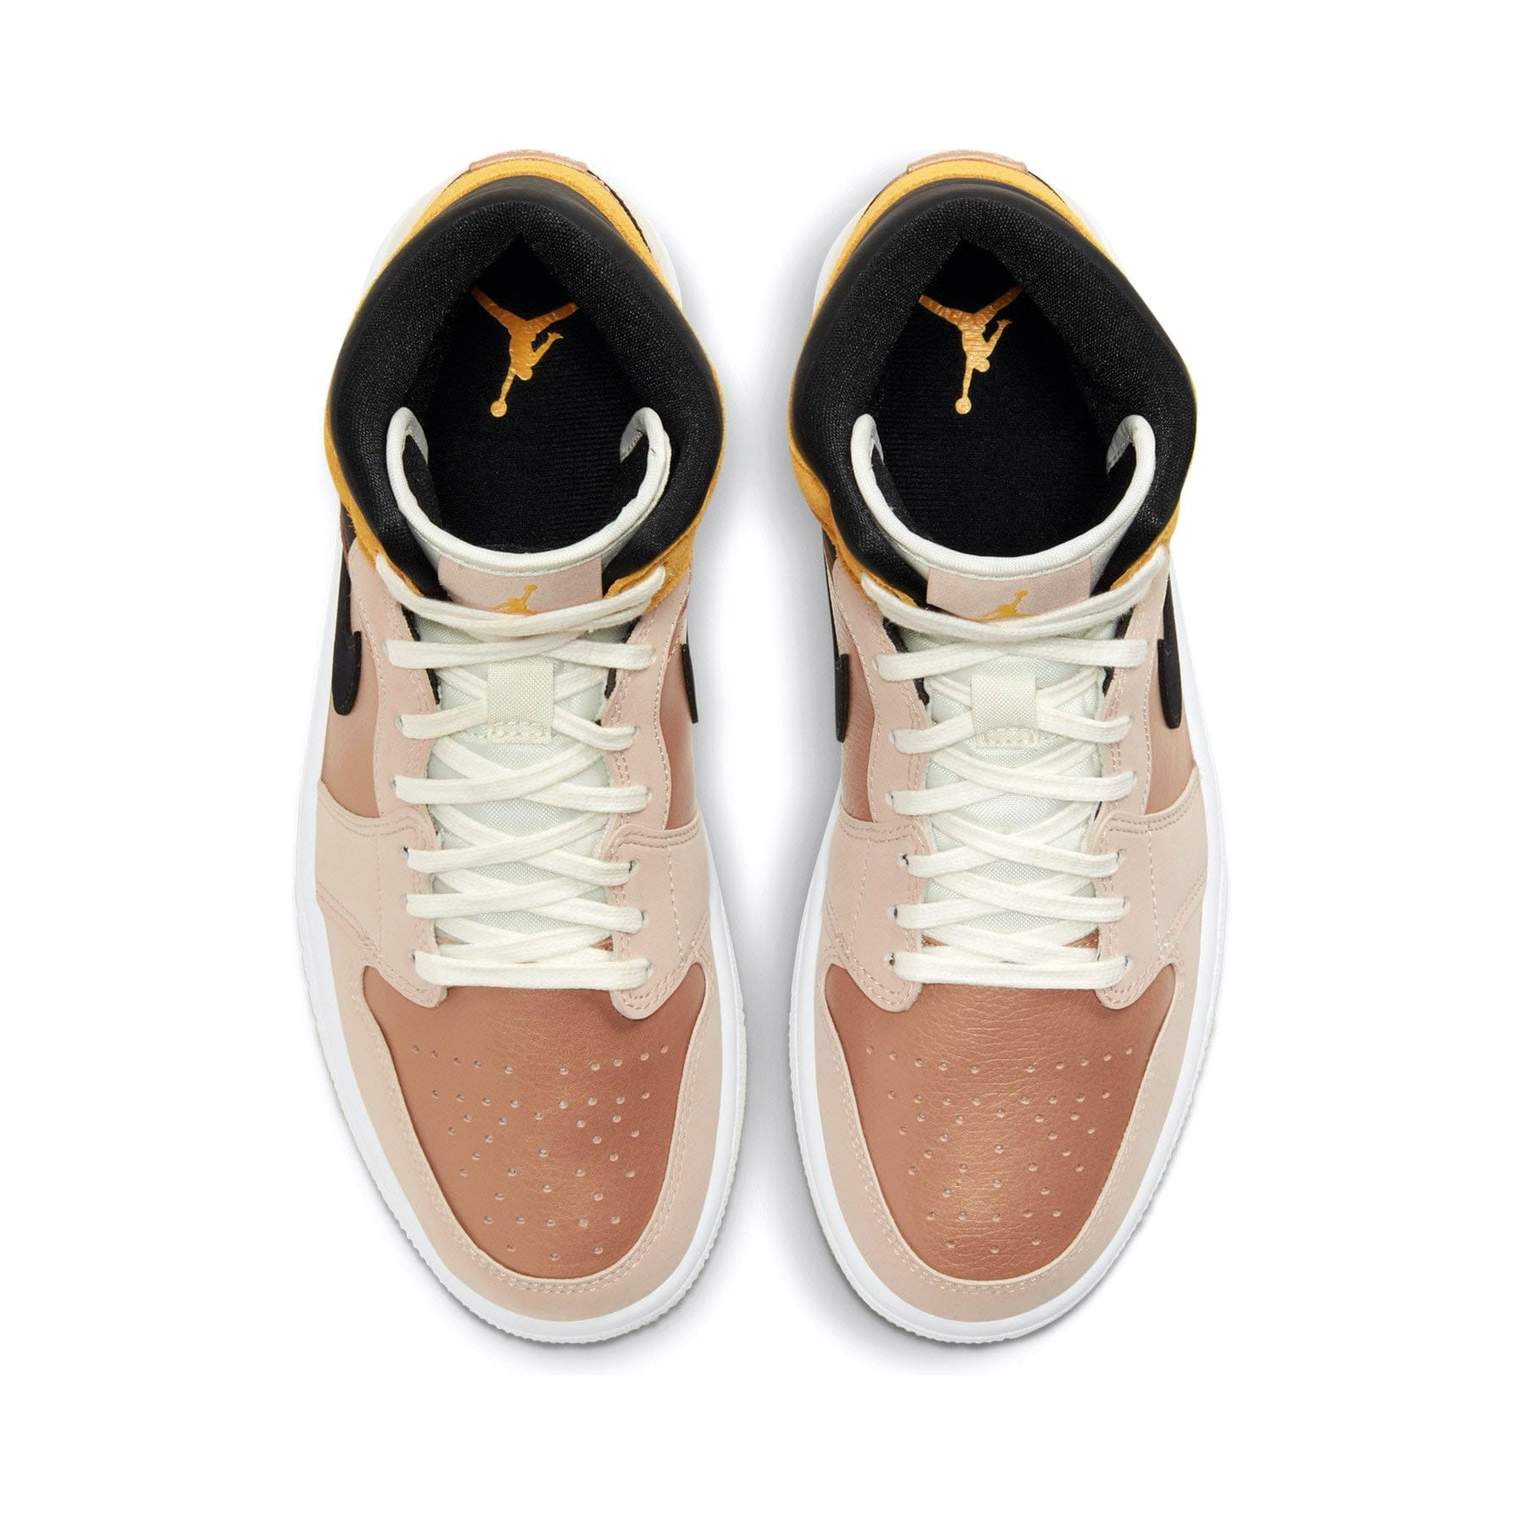 Double Boxed  99.99 Nike Air Jordan 1 Mid Particle Beige (W) Double Boxed